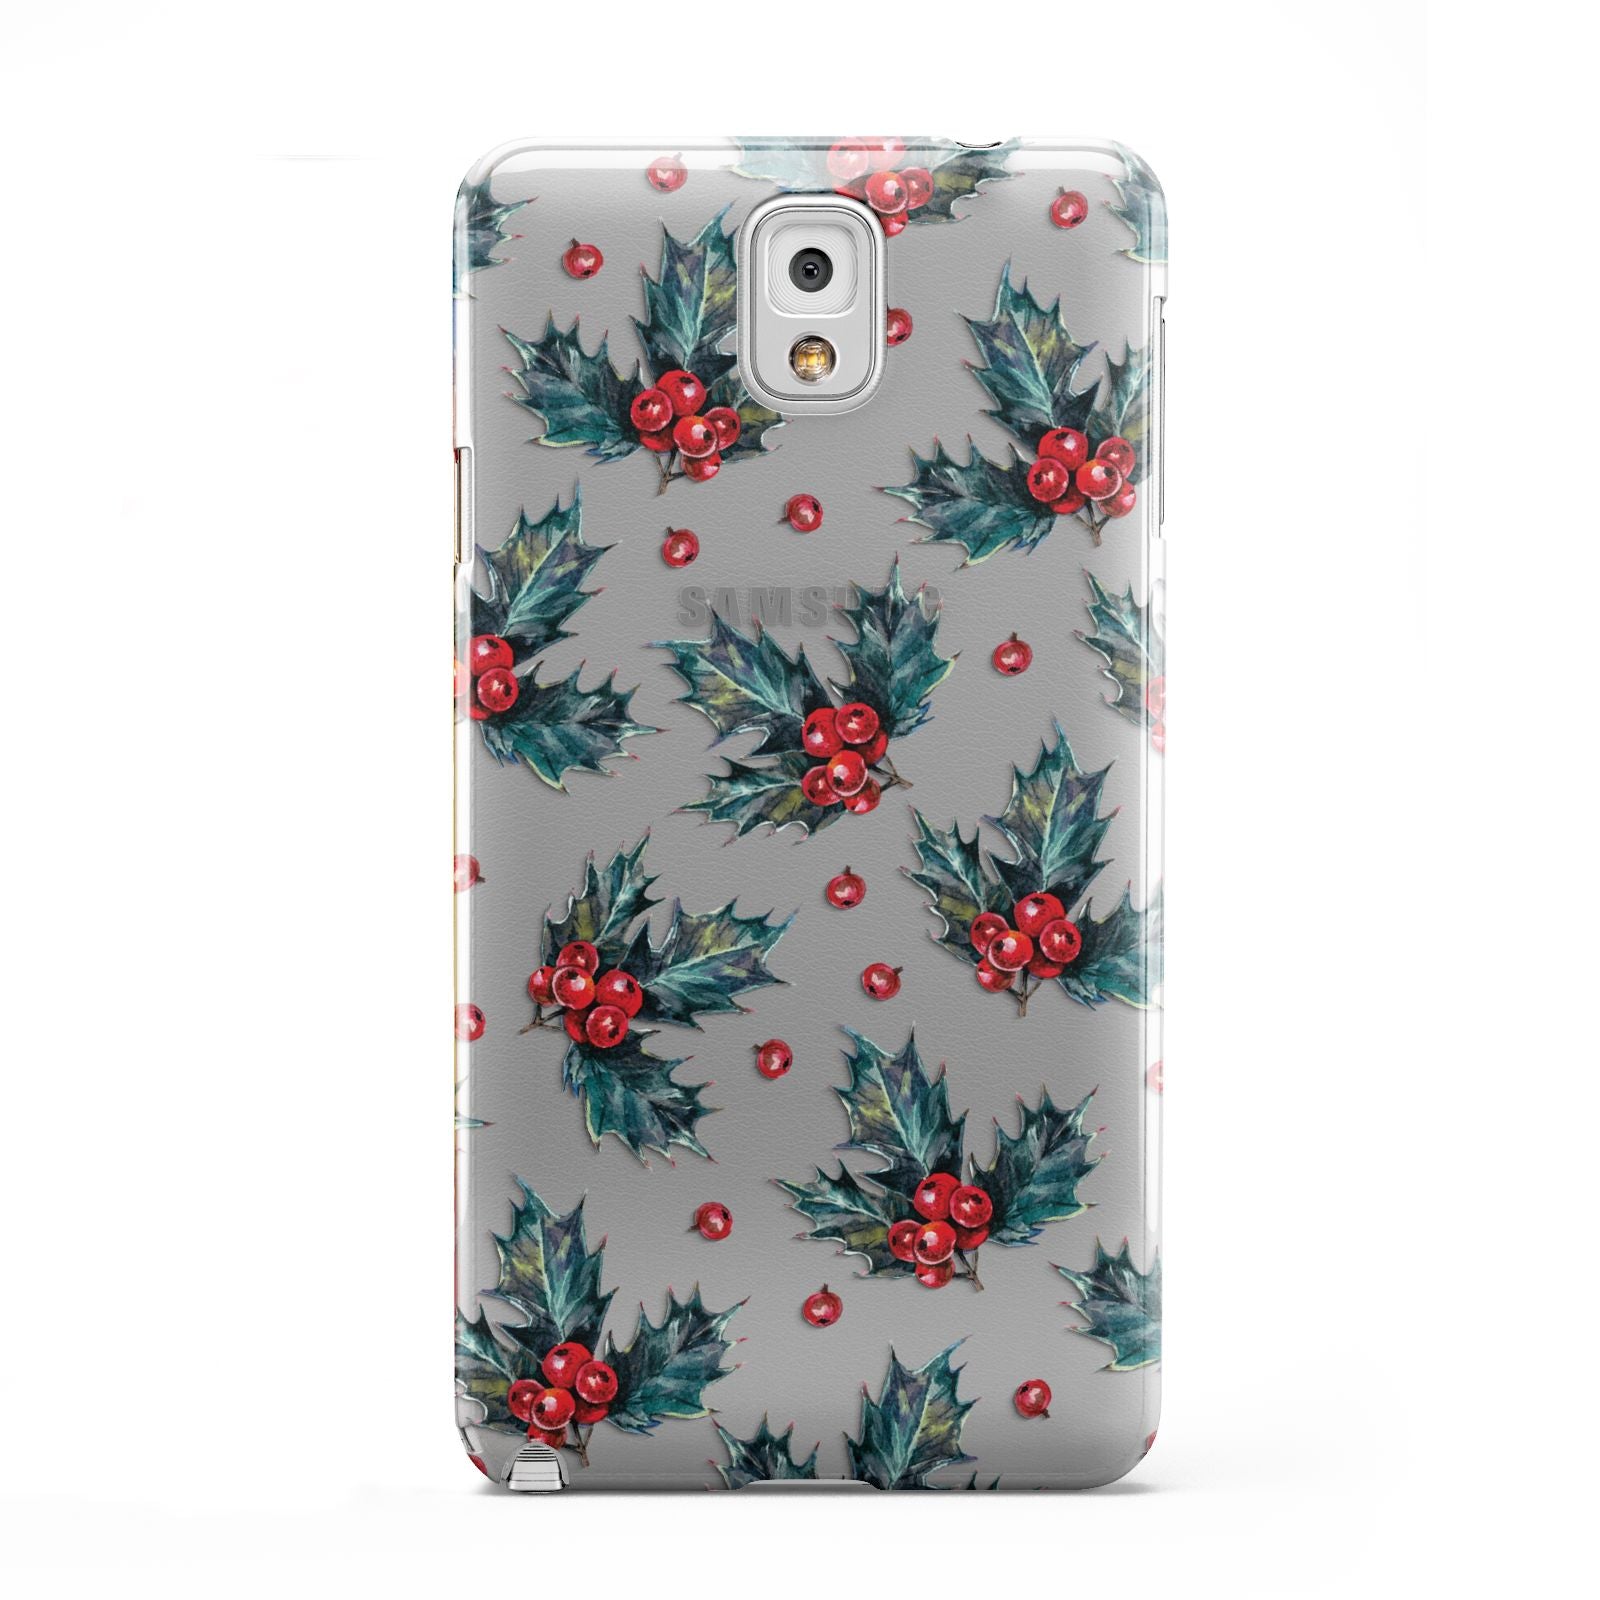 Holly berry Samsung Galaxy Note 3 Case